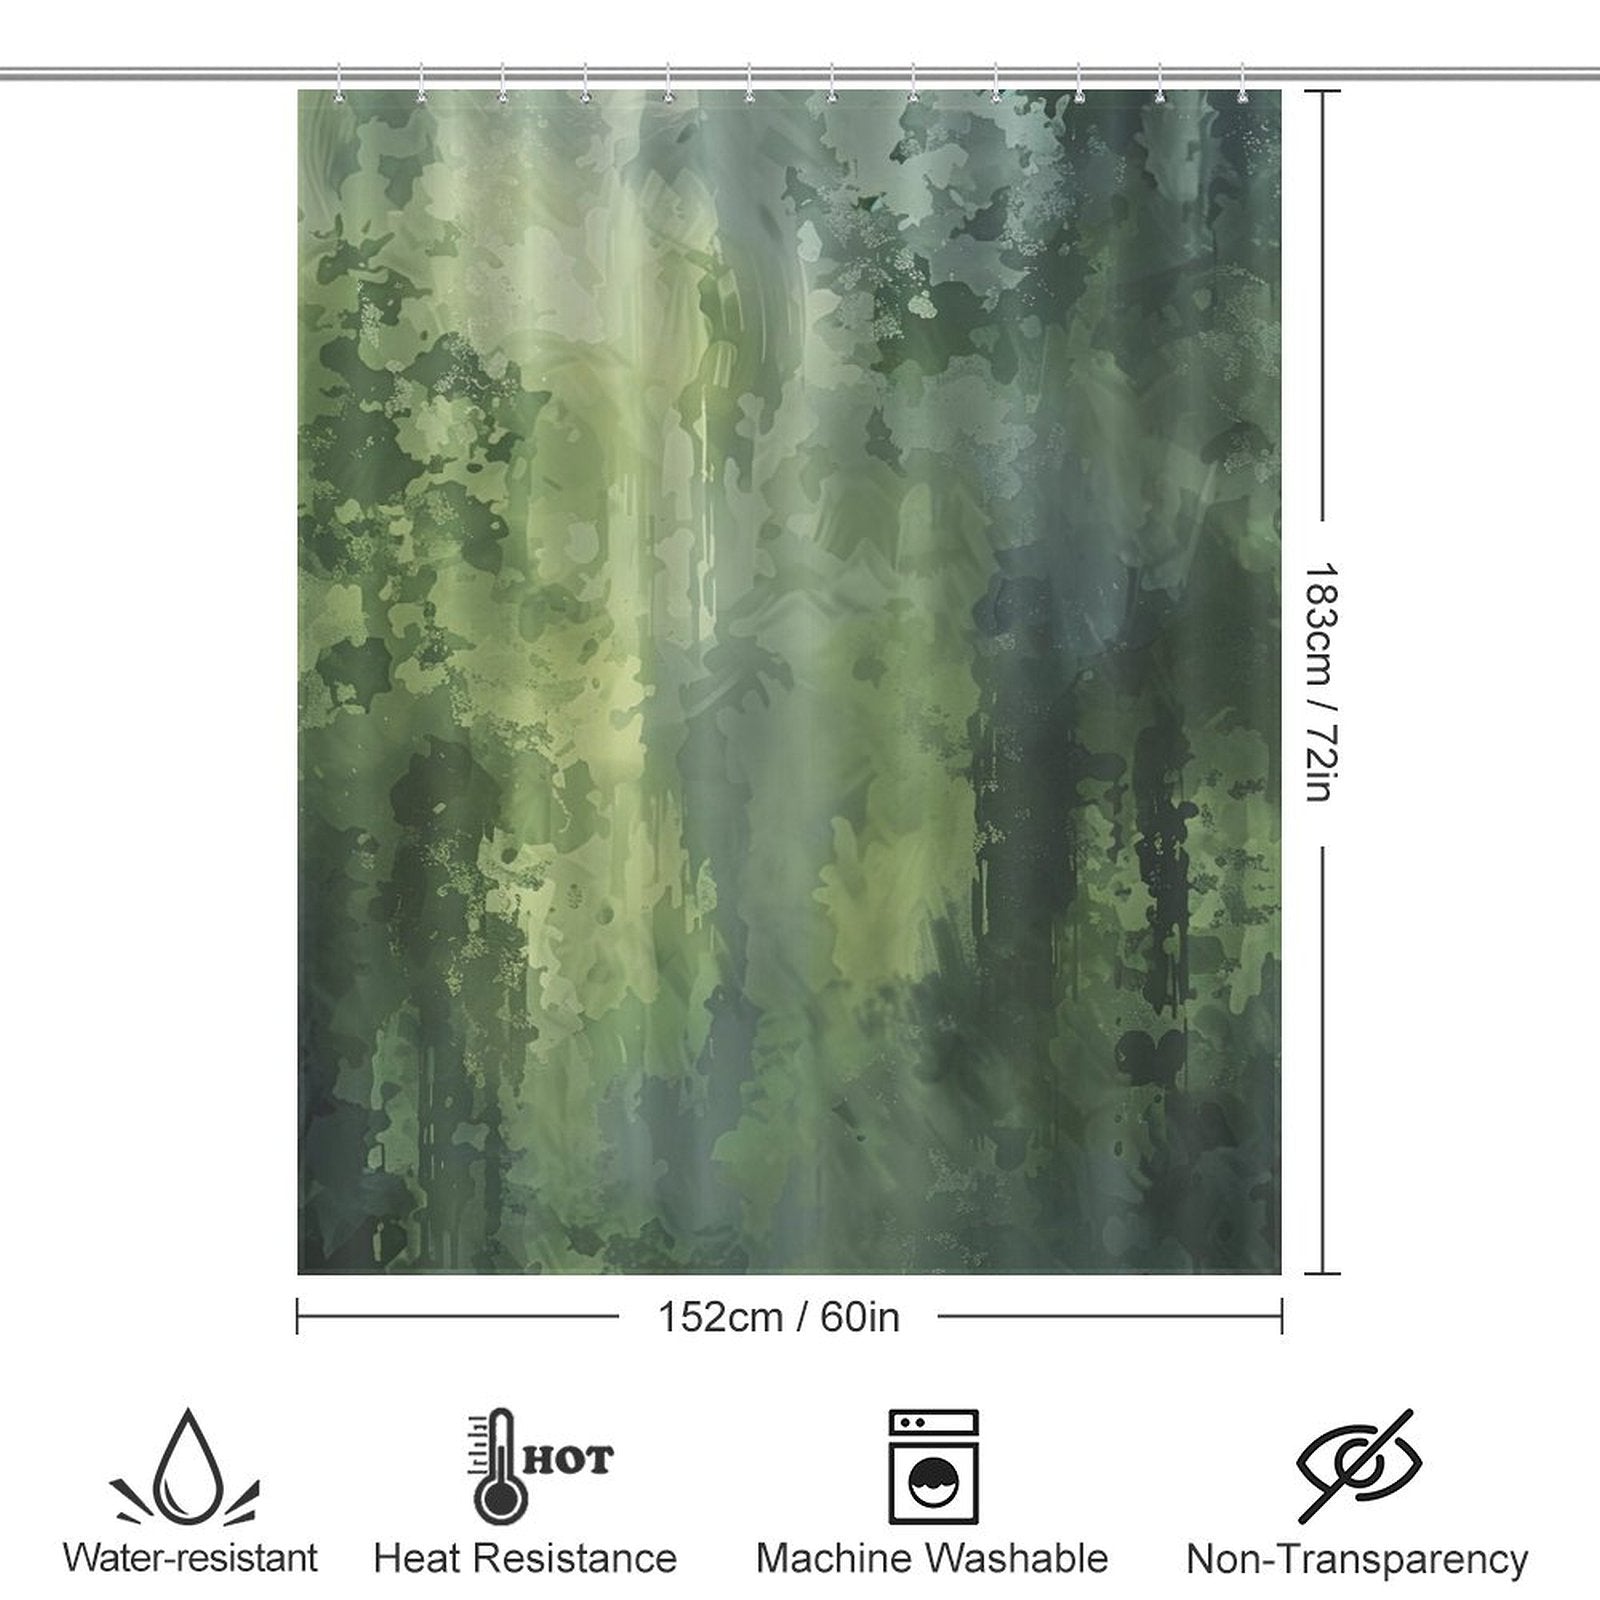 An **Olive Green Emerald Green Plant Patterns Abstract Shower Curtain-Cottoncat** in olive green plant patterns, measuring 183 cm by 152 cm. The icons below indicate it is water-resistant, heat-resistant, machine washable, and non-transparent.